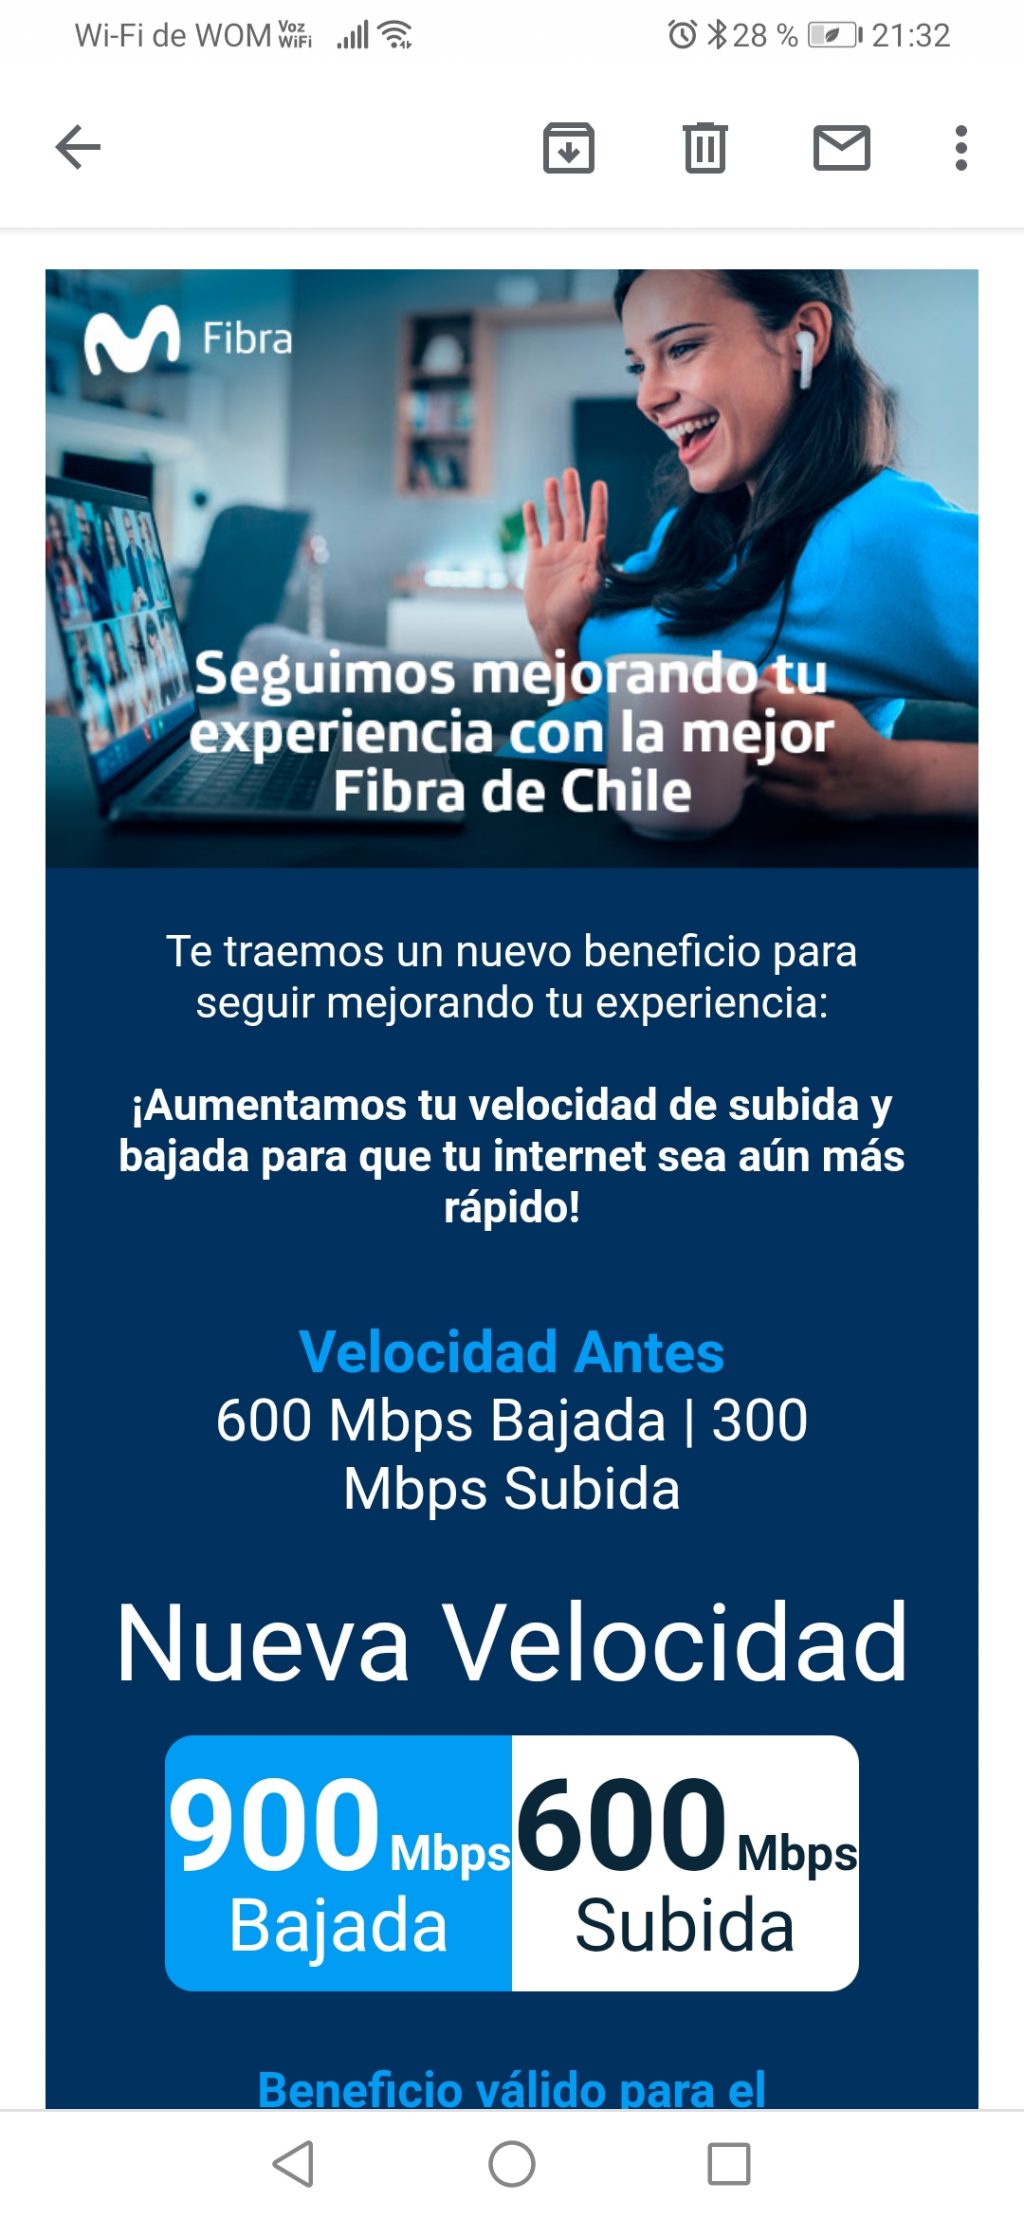 Movistar home internet customers have also reported receiving a speed boost